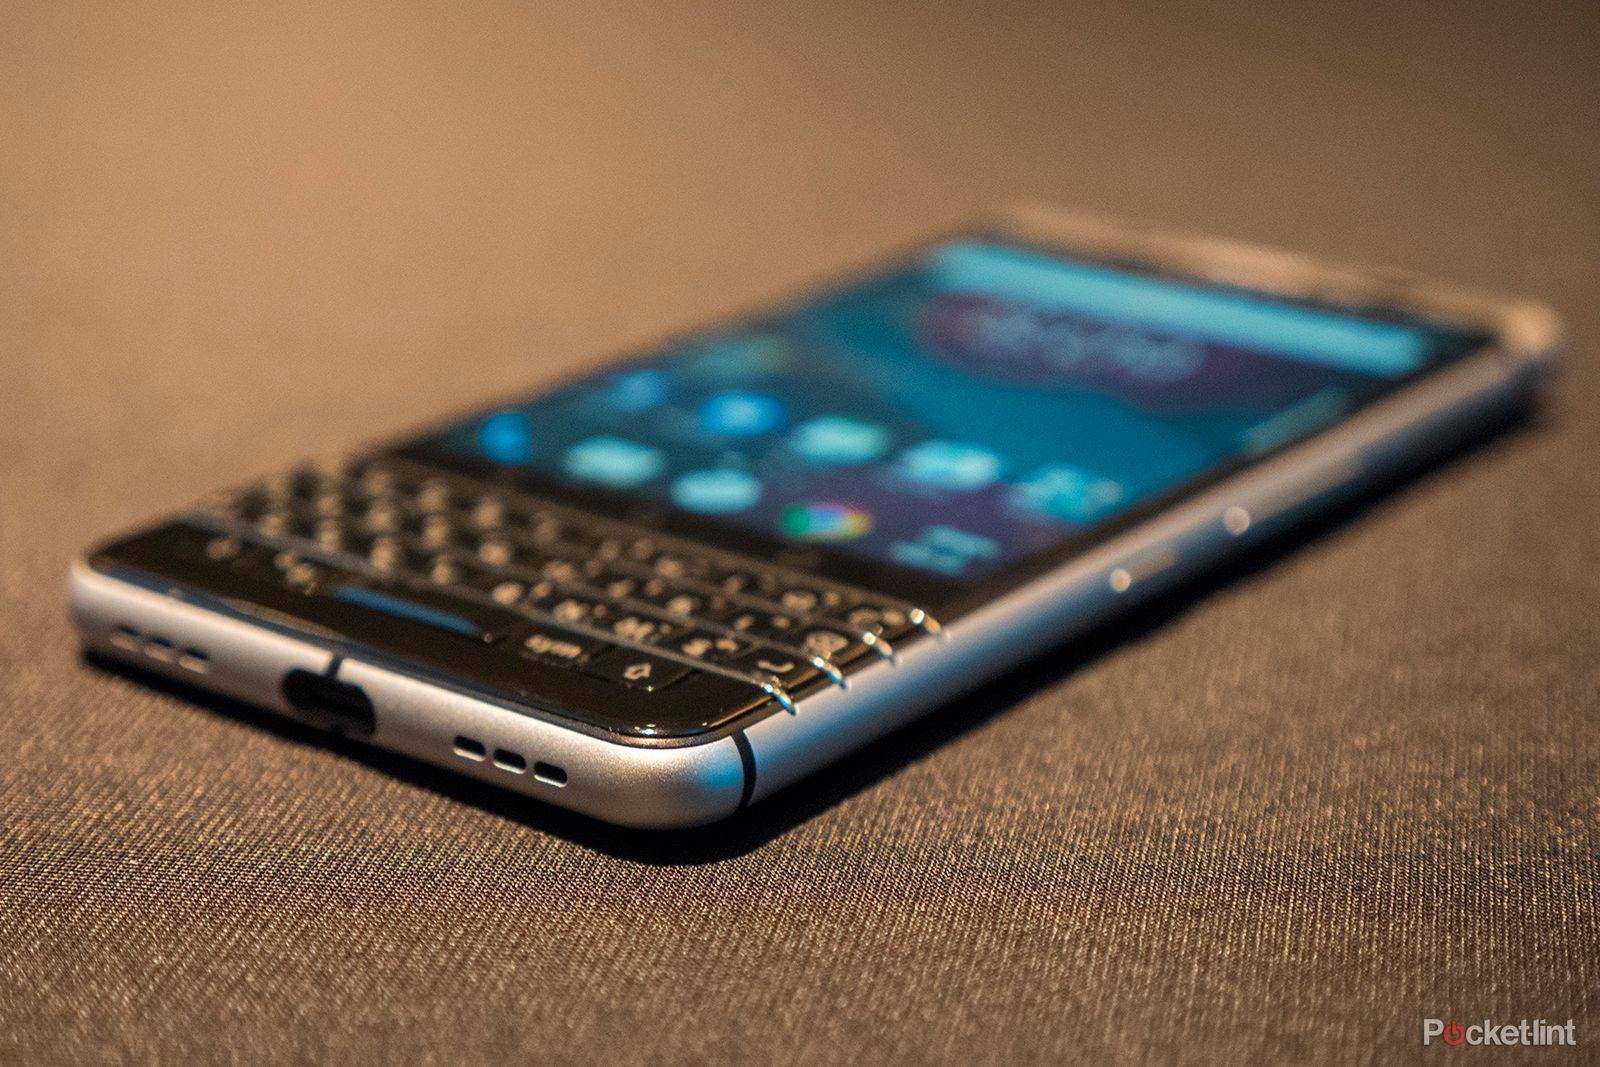 blackberry keyone is official bringing classic qwerty to modern day image 1